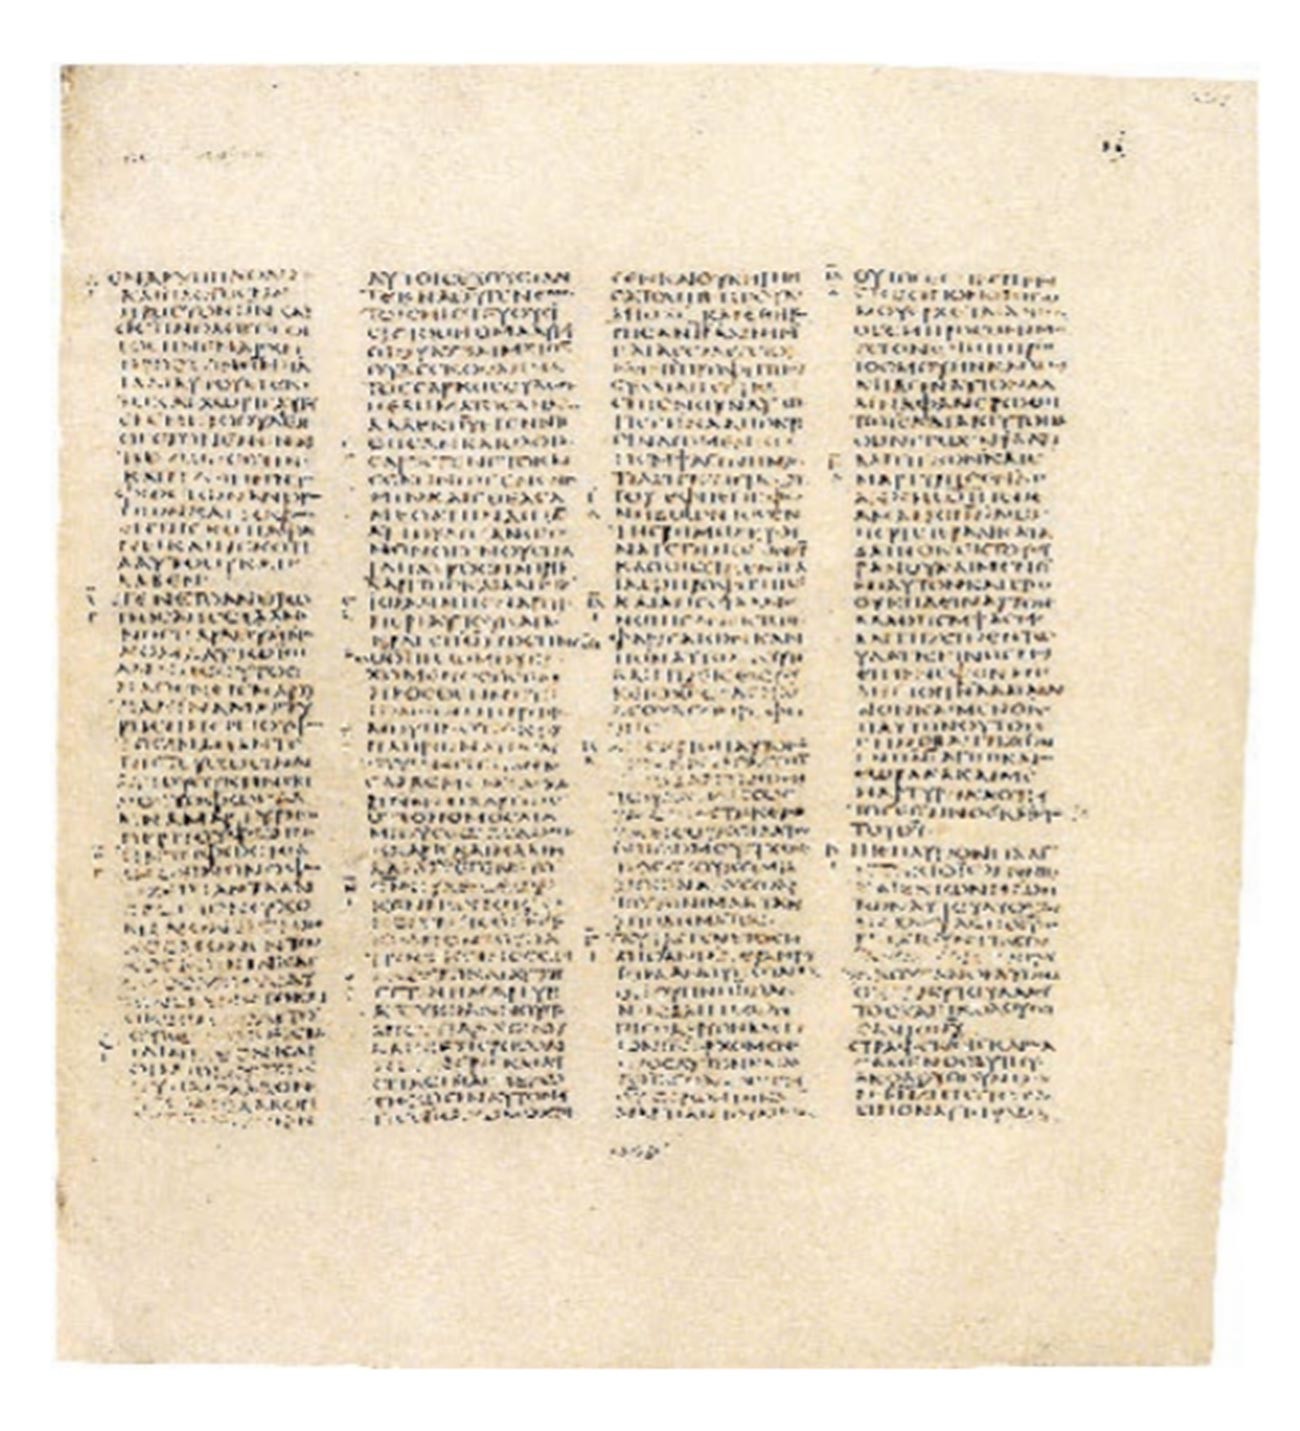 A page from the Codex Sinaiticus